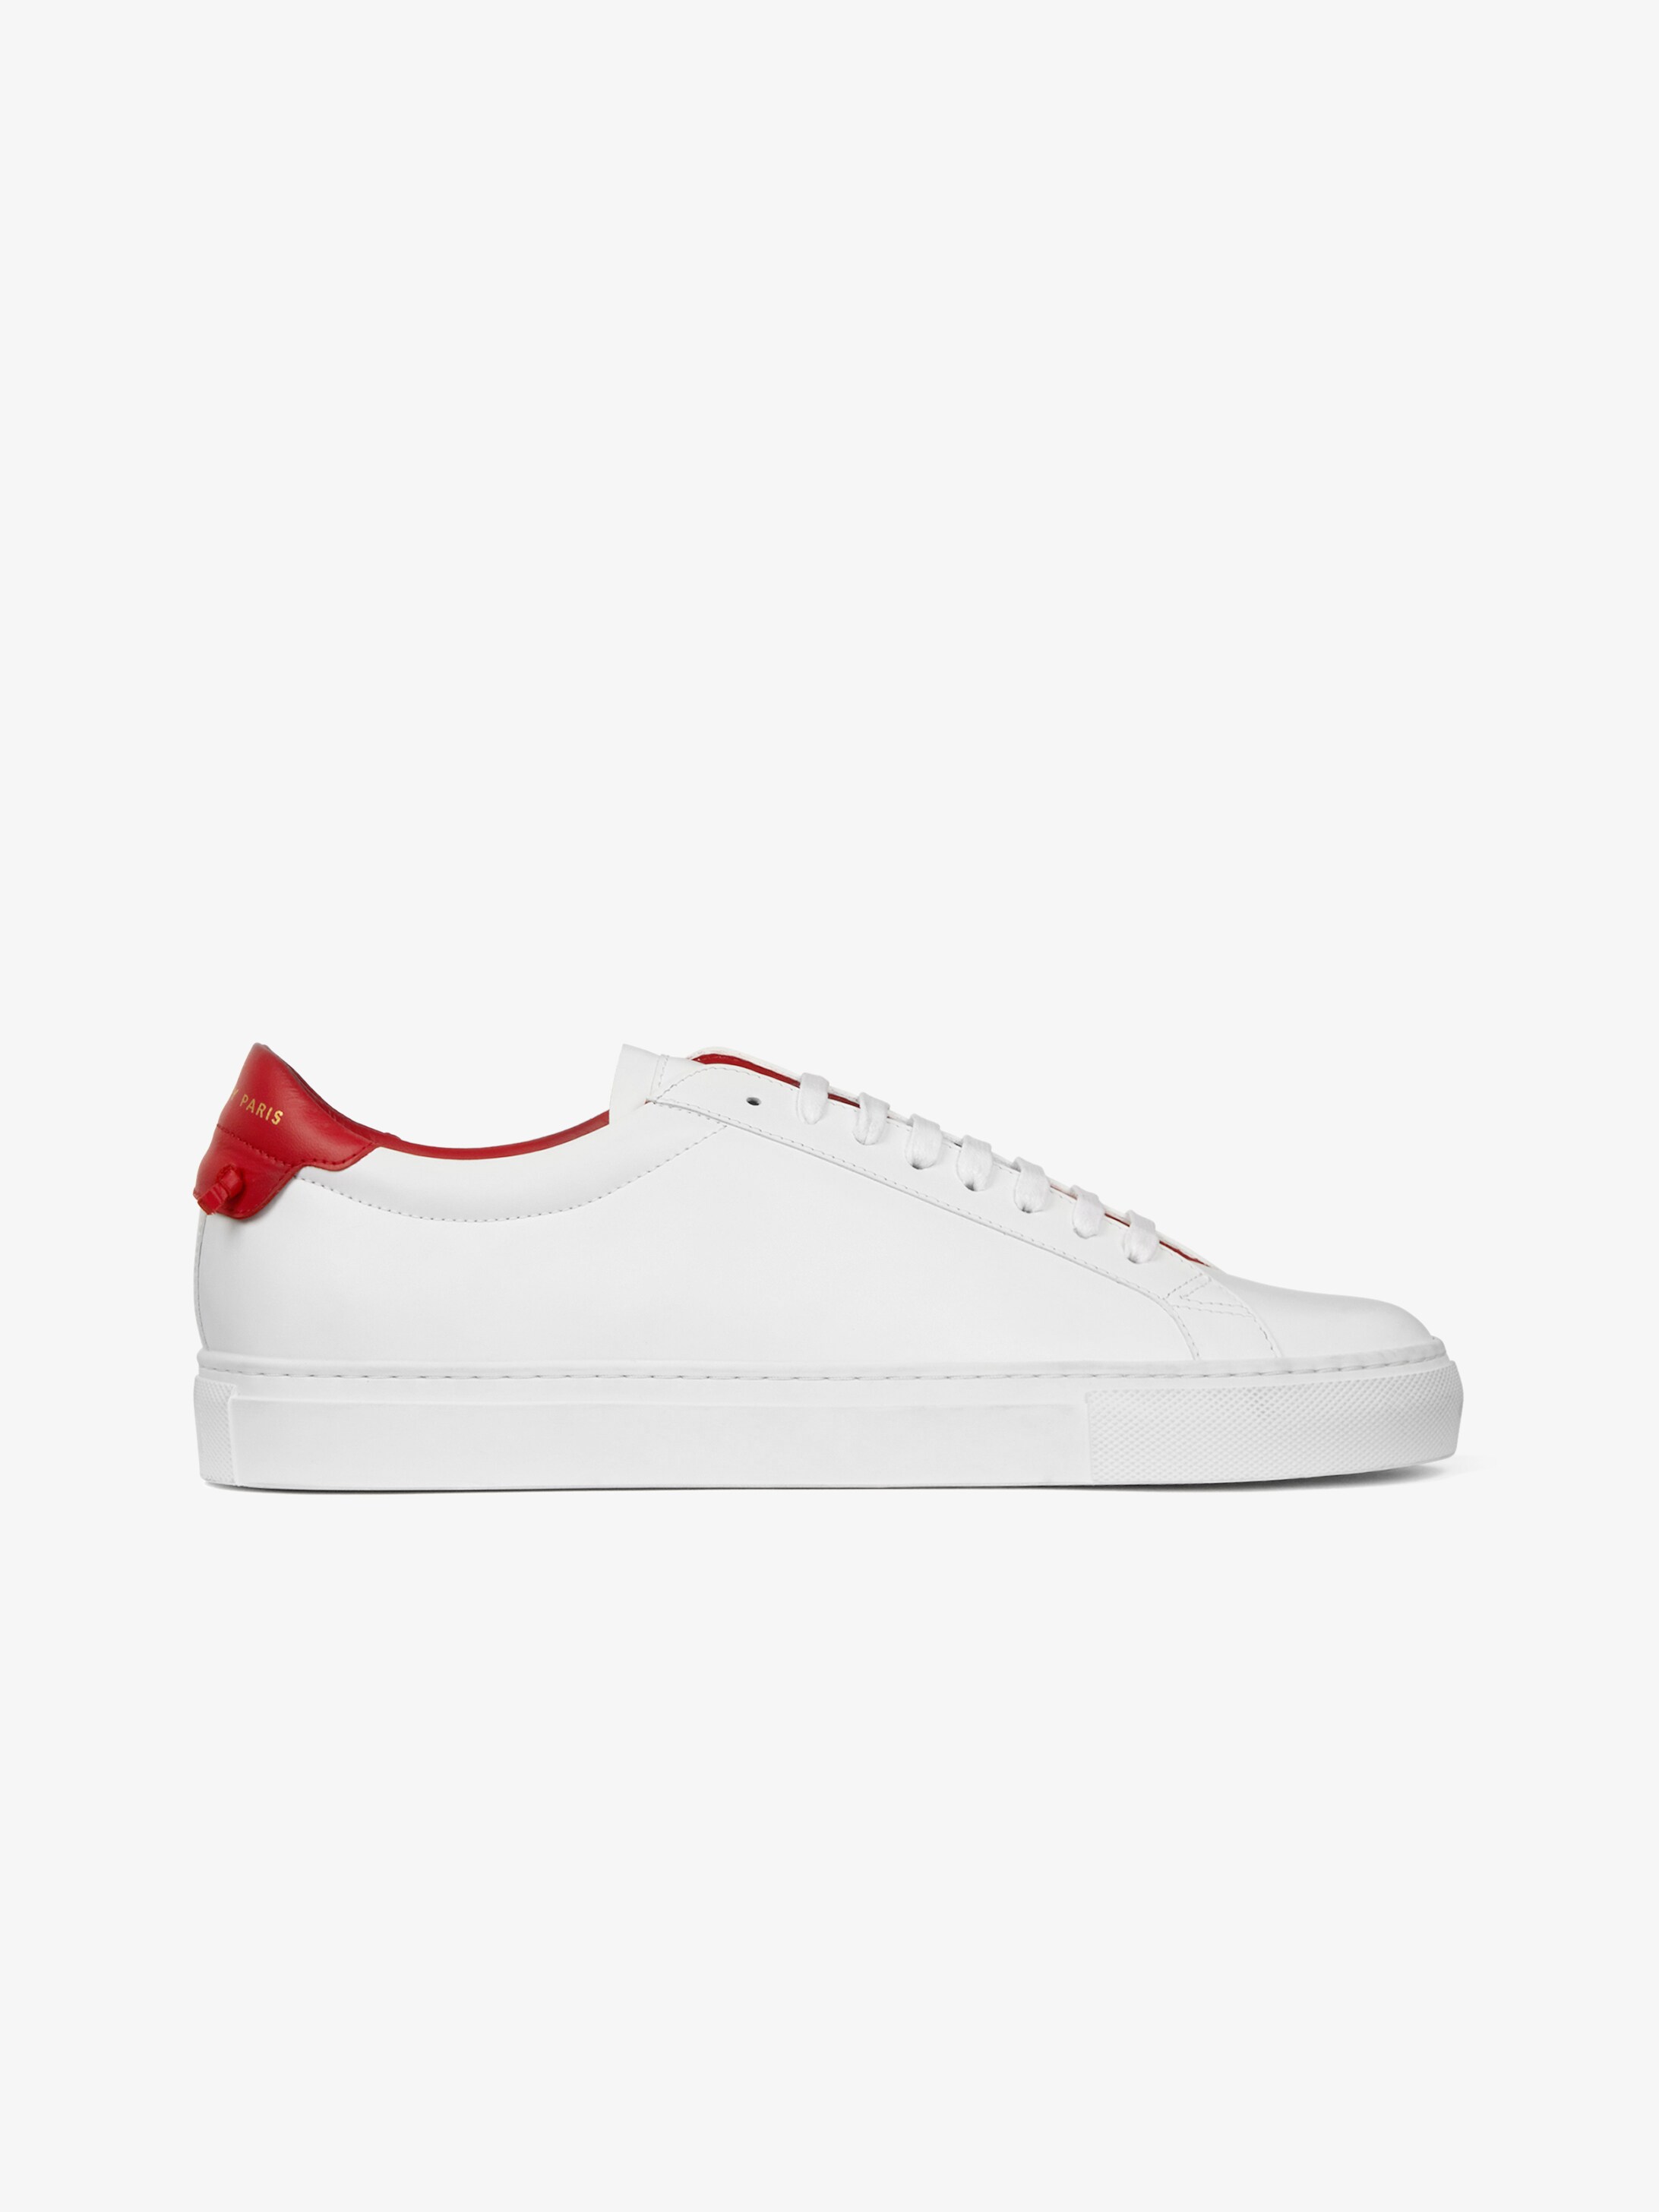 Low sneakers in leather | GIVENCHY Paris